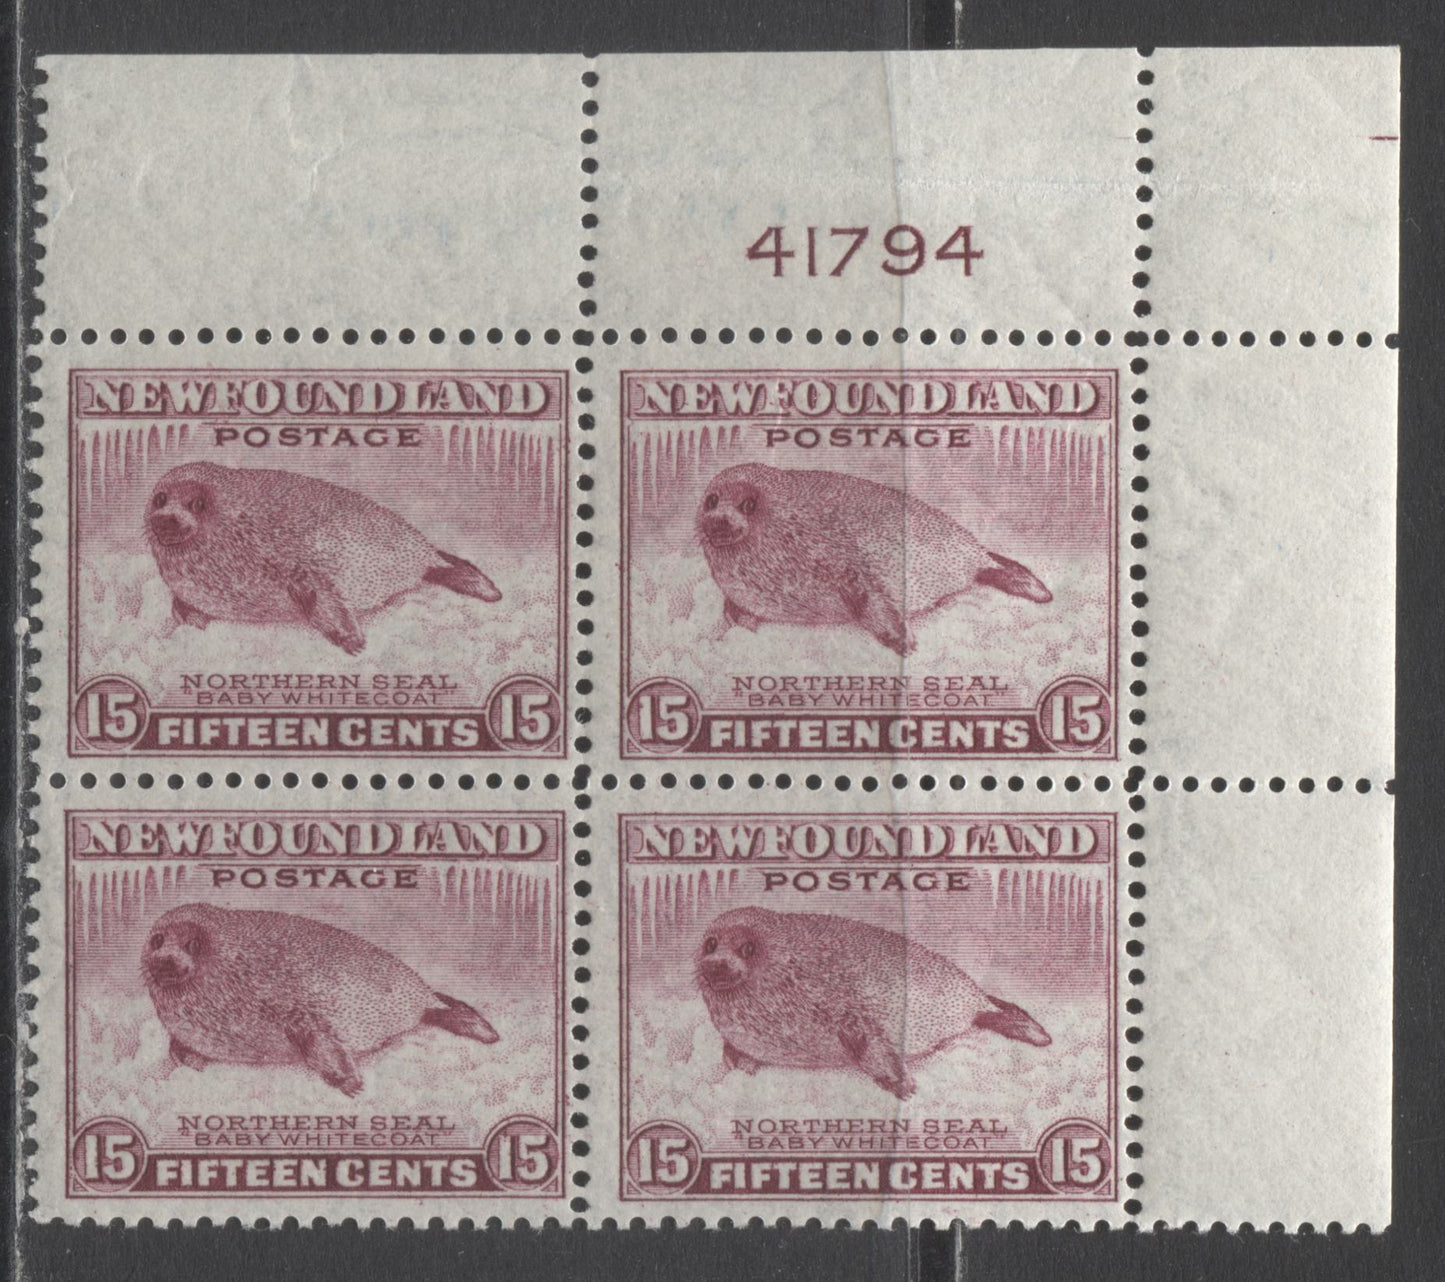 Lot 233 Newfoundland #262 15c Pale Rose Violet Harp Seal Pup, 1941-1944 Resources Re-Issue, A FNH UR Plate 41794 Block Of 4